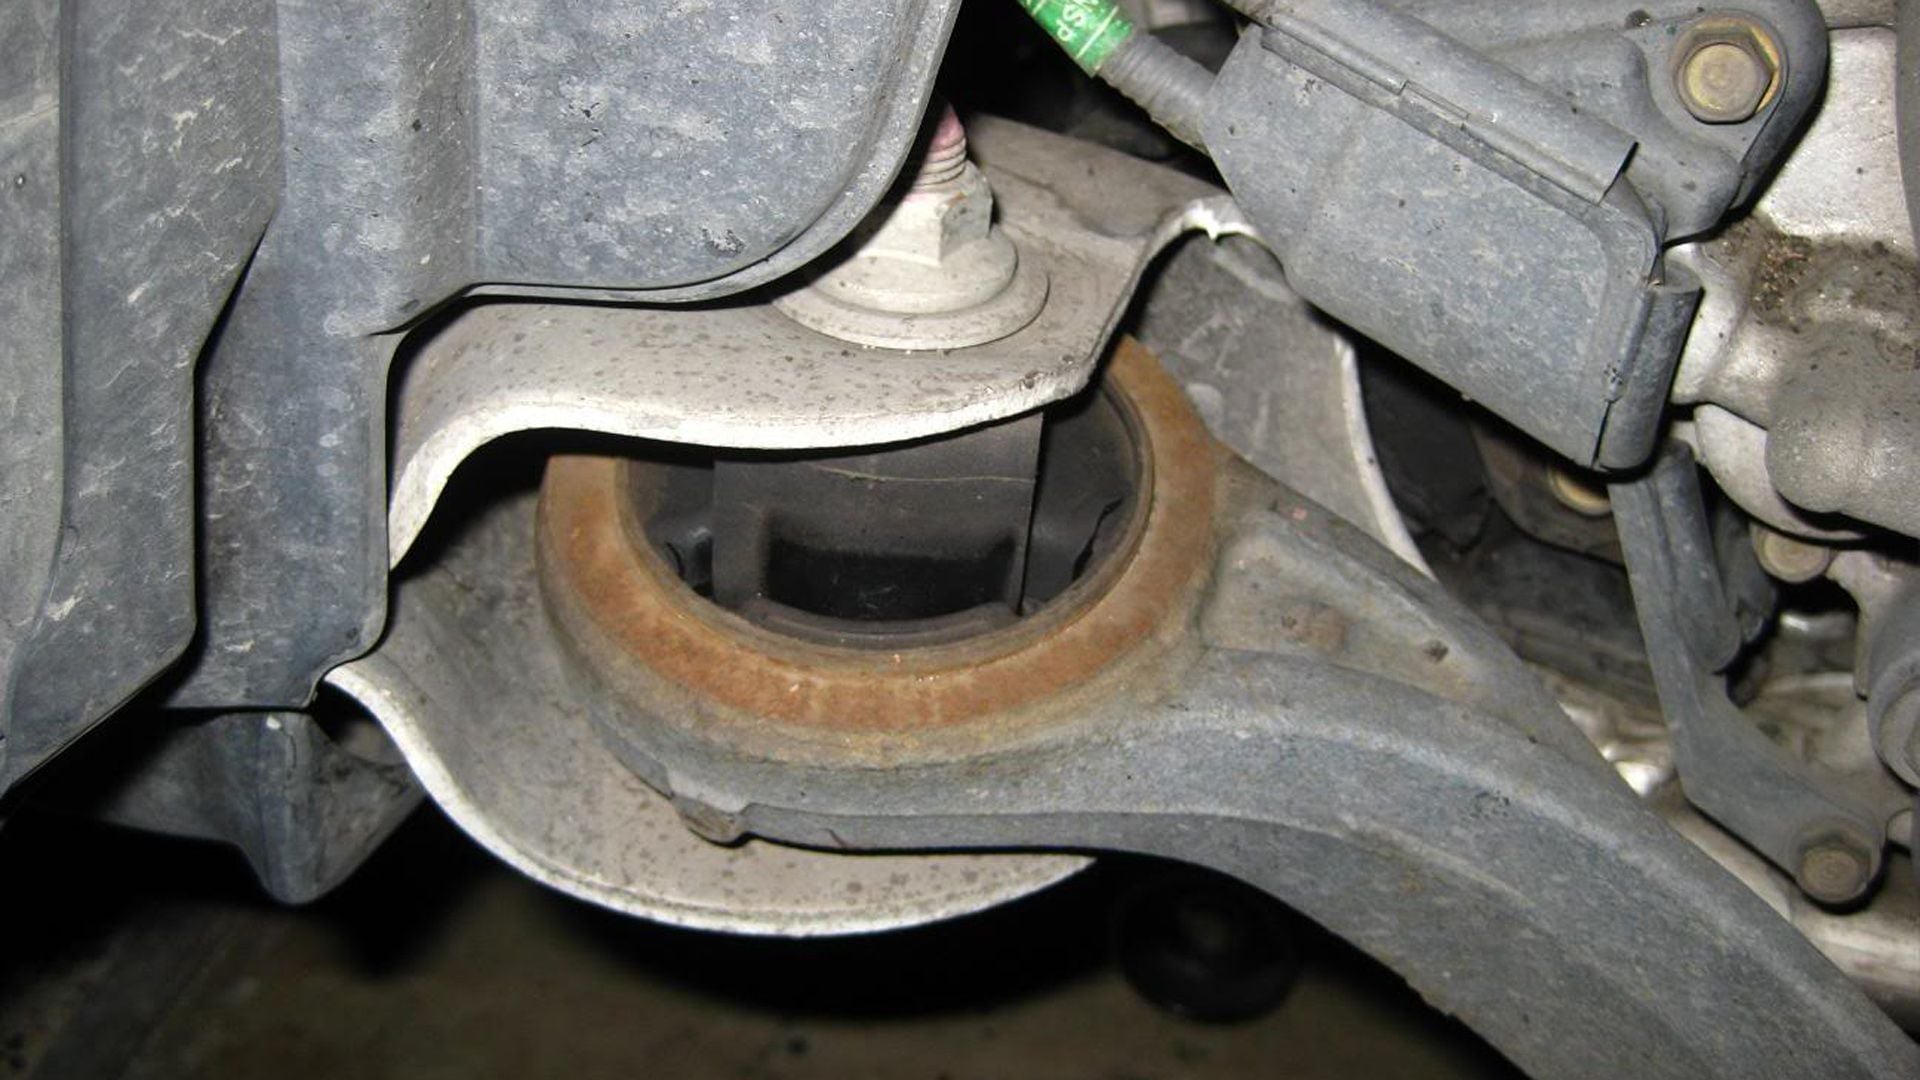 CAN Suspension Lateral Arm Bushing For 2006 Acura RL